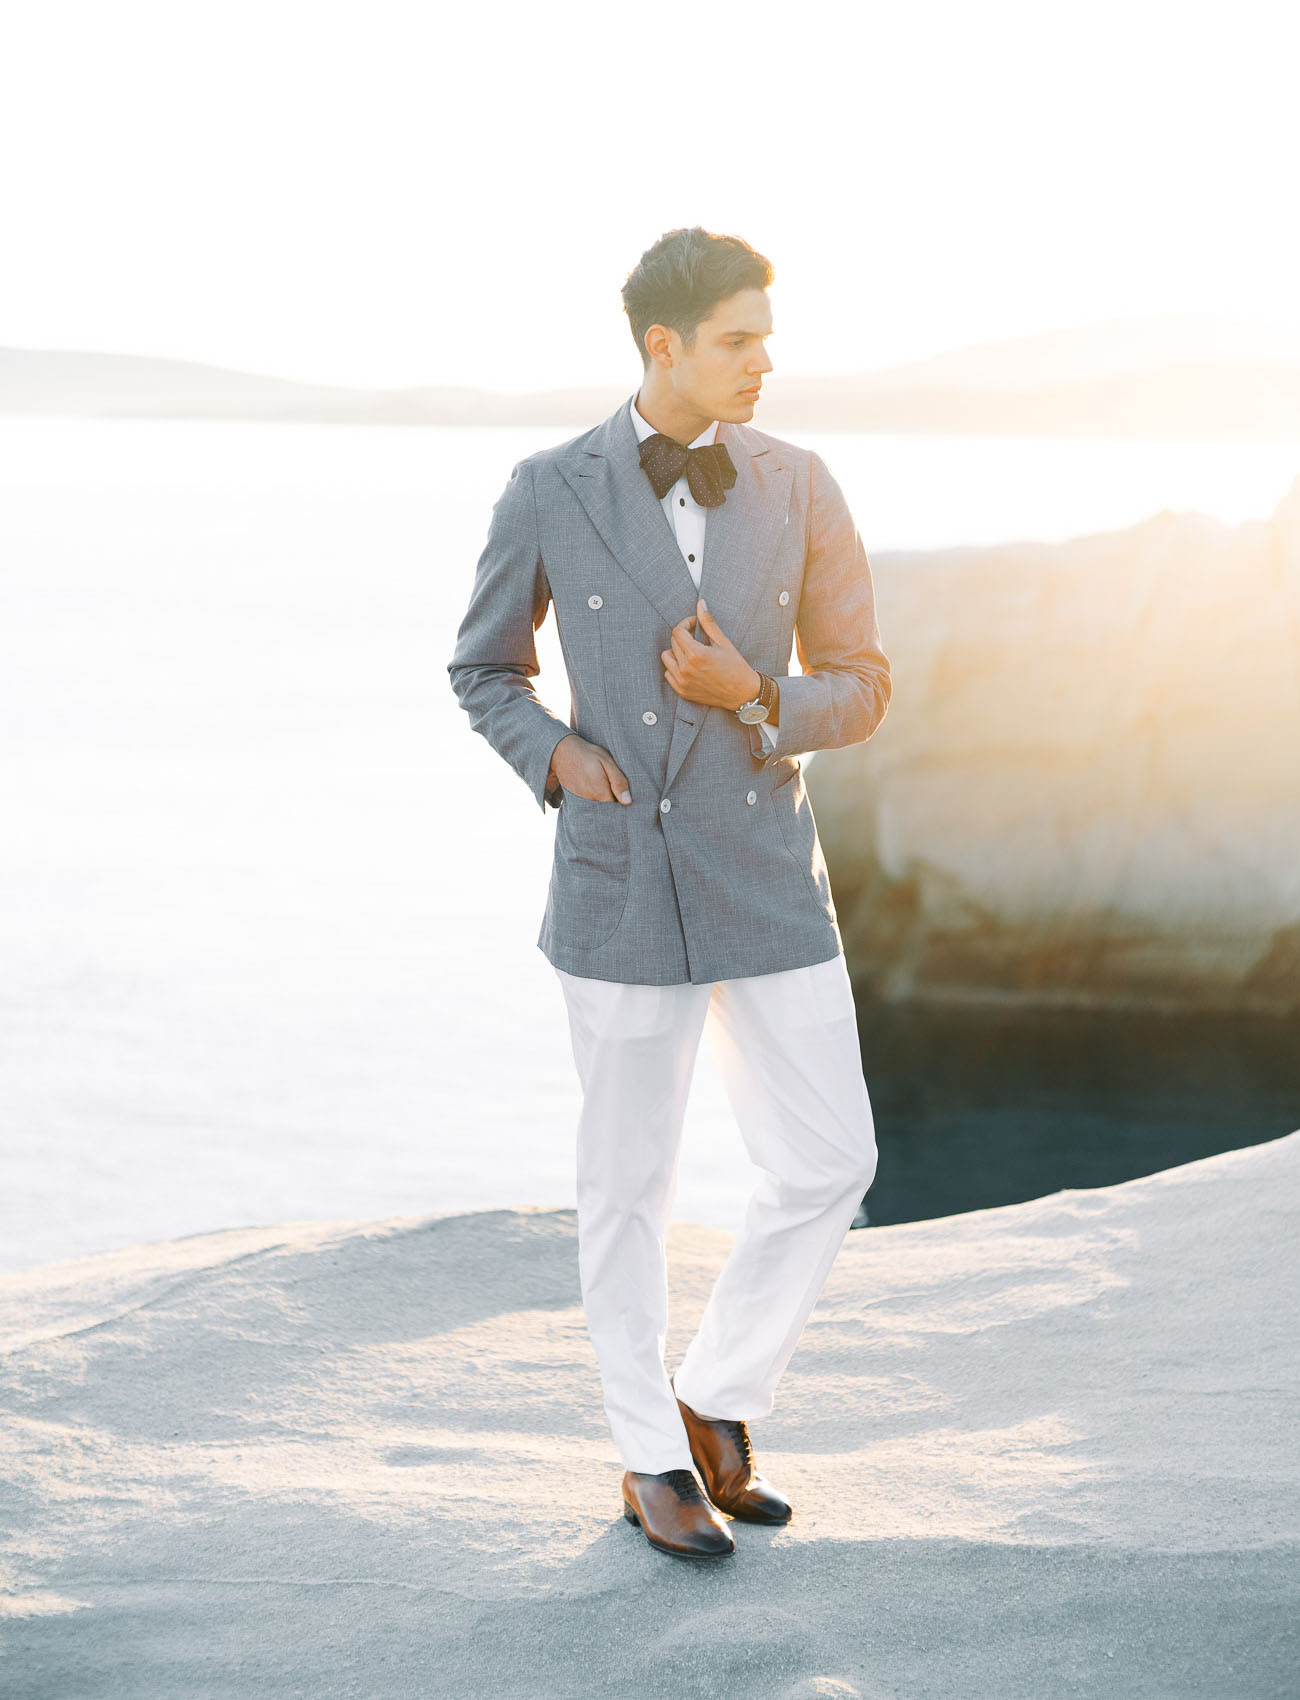 The groom was wearing an island look with white pants, vintage shoes, a grey oversized blazer and a polka dot bow